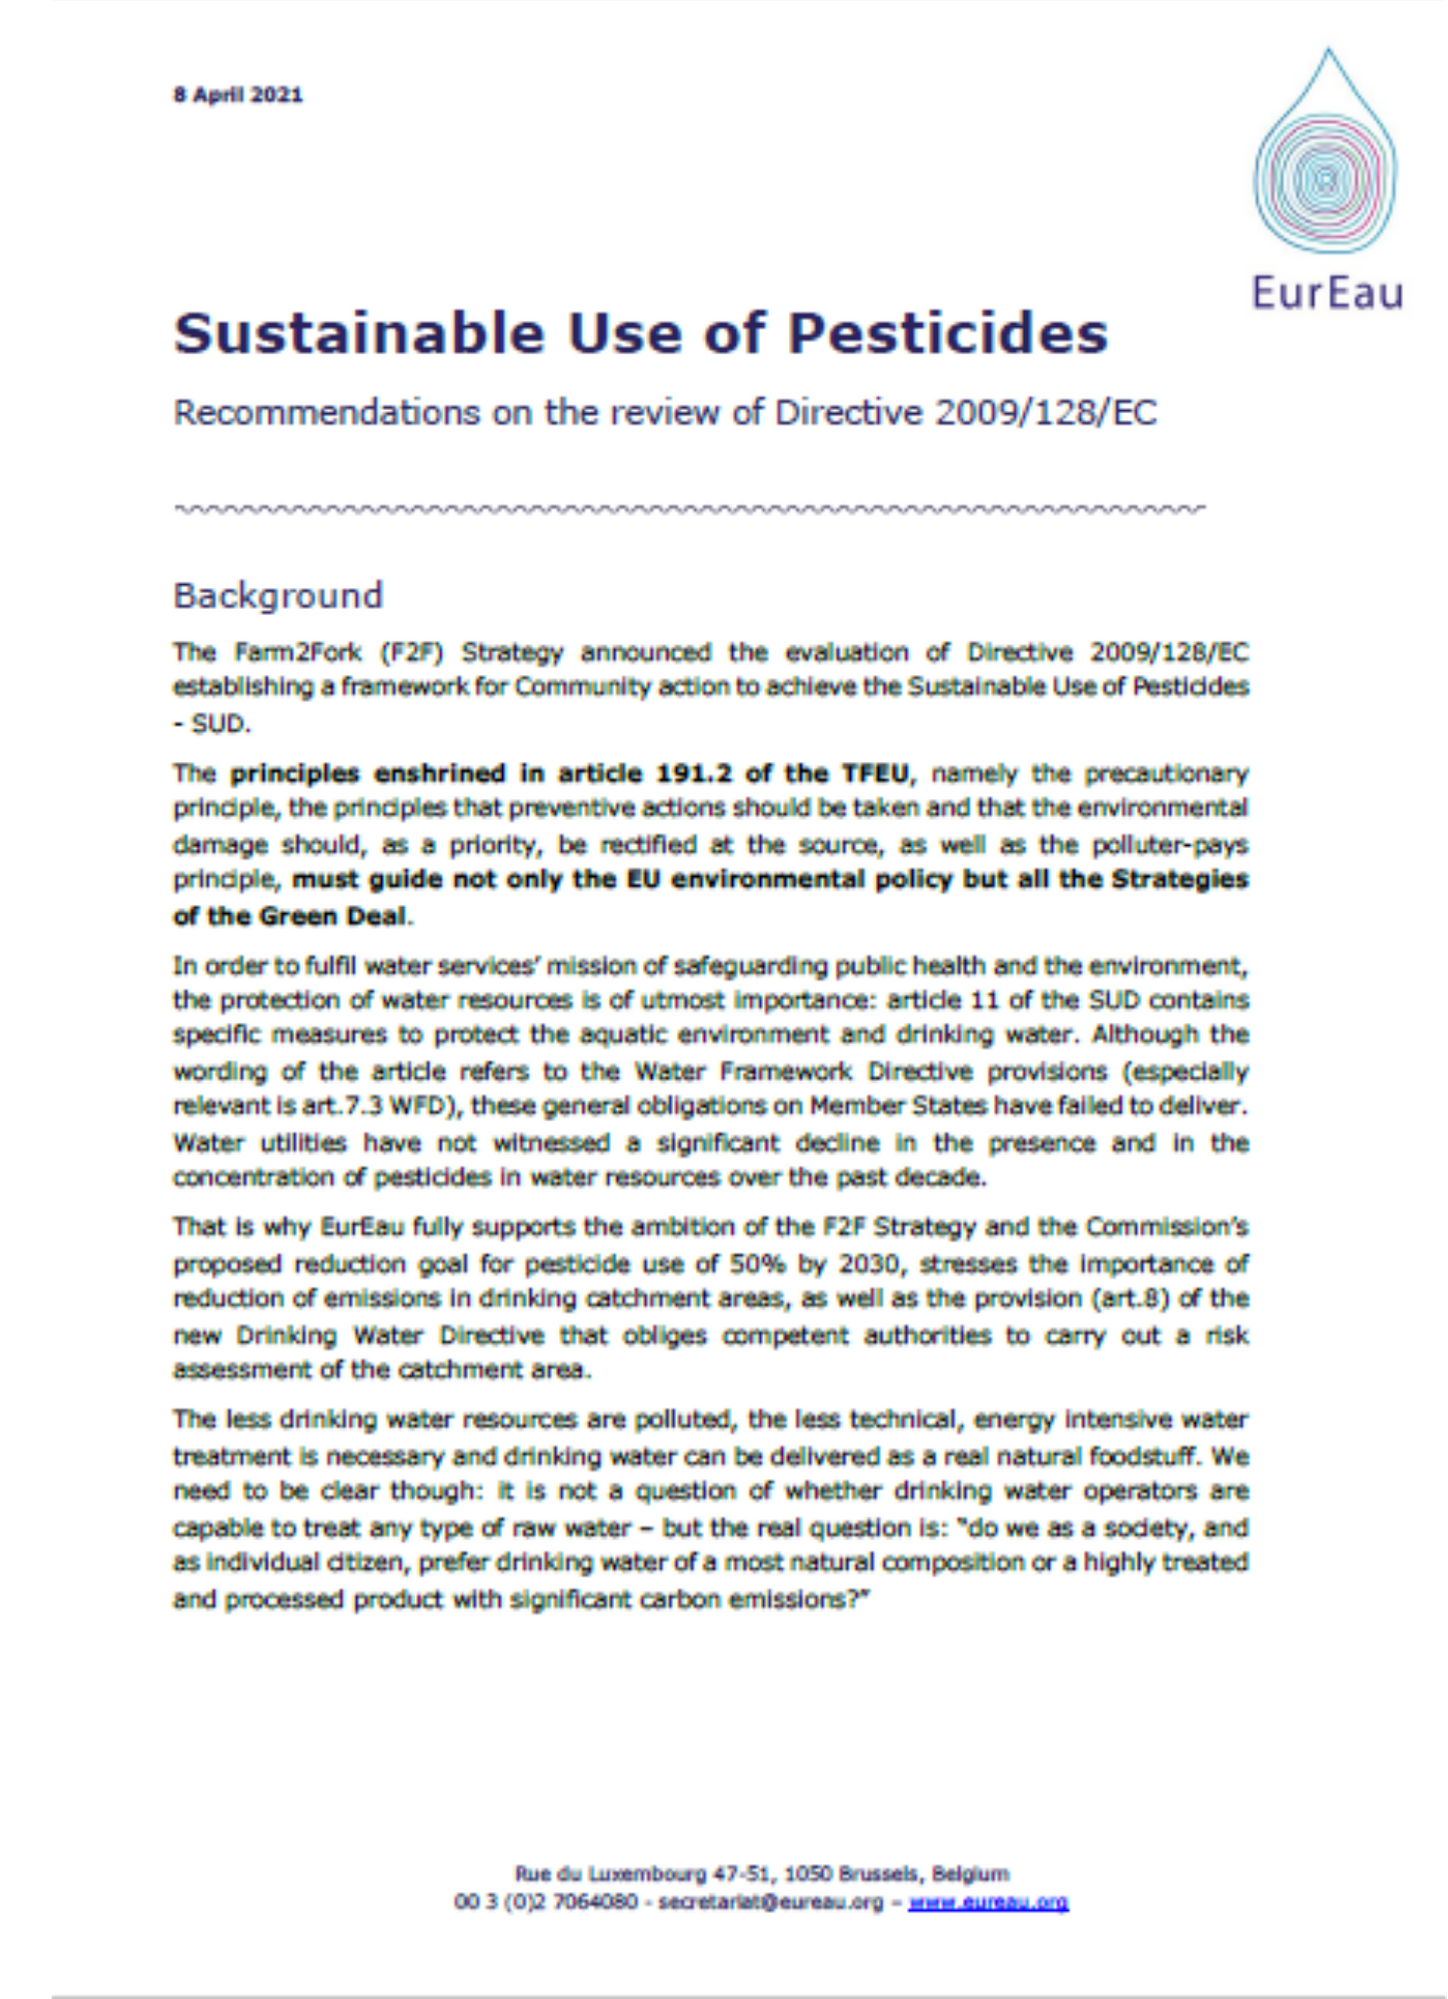 Sustainable Use of Pesticides - Recommendations on the review of Directive 2009/128/EC